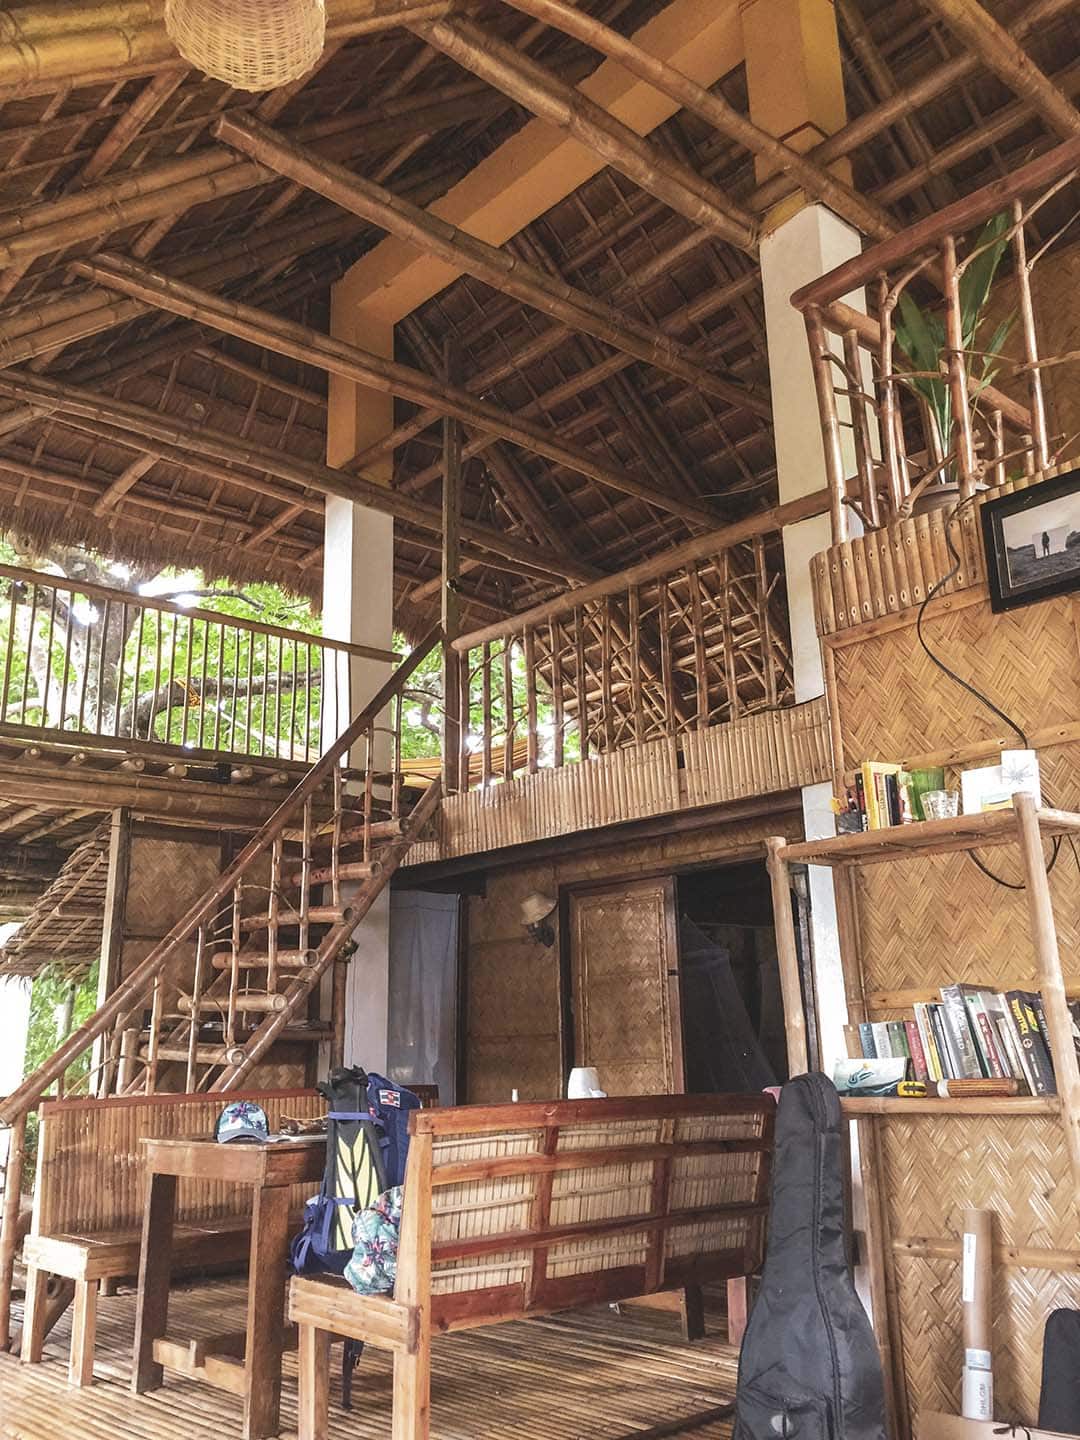 Tip while traveling the Philippines sustainably: Stay in eco-lodges or Airbnbs and treat it like it is your own home. 